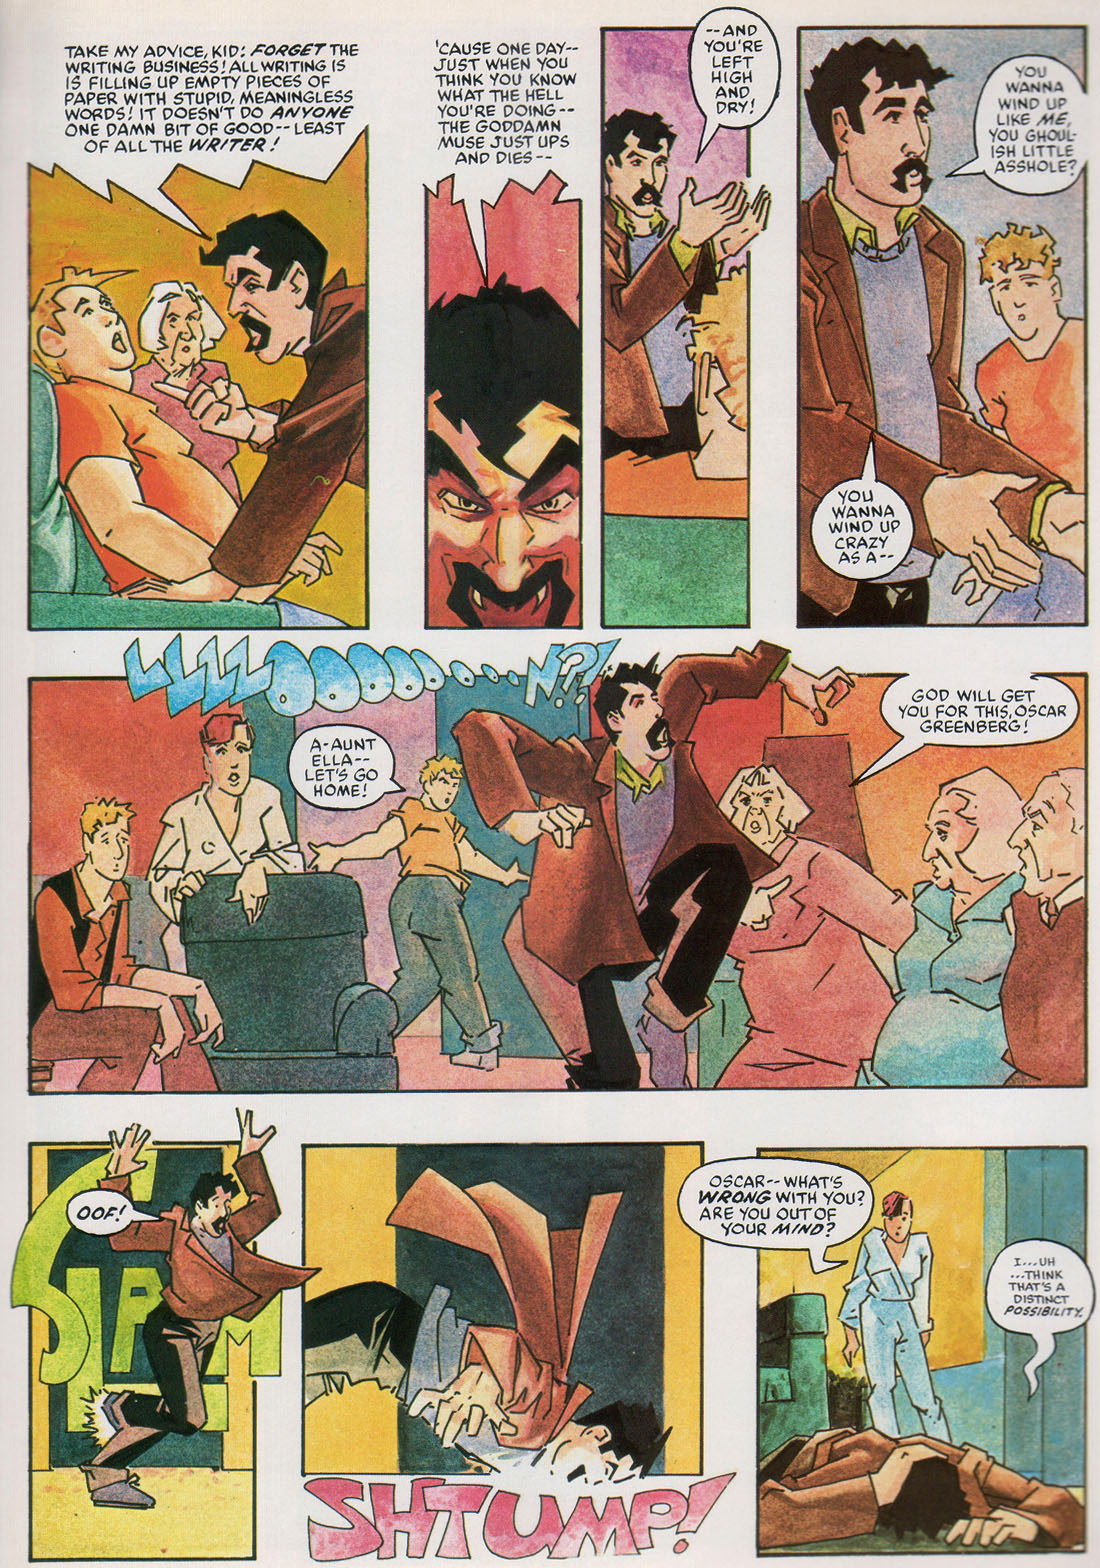 Marvel Graphic Novel issue 20 - Greenberg the Vampire - Page 21